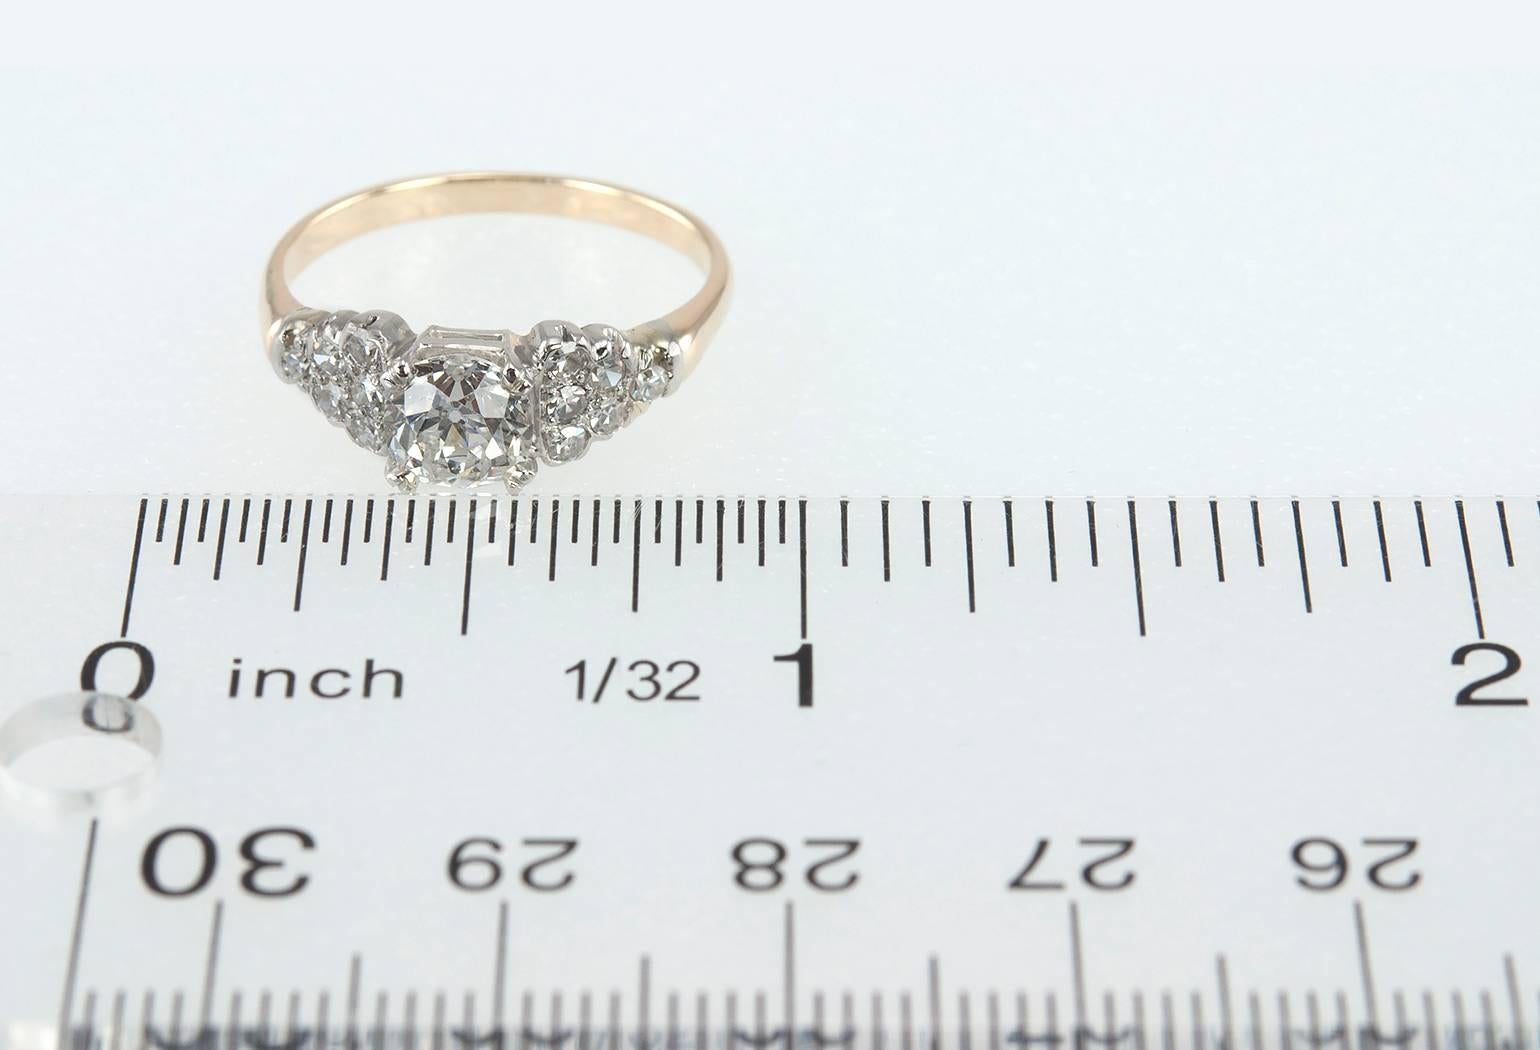 A beautiful 14 karat gold engagement ring featuring an old cushion cut center diamond that is 0.91 carats, H in color and SI1 in clarity (per EGL cert) along with 12 single cut side diamonds, 6 on each side. Circa 1930s.  The ring has a low profile